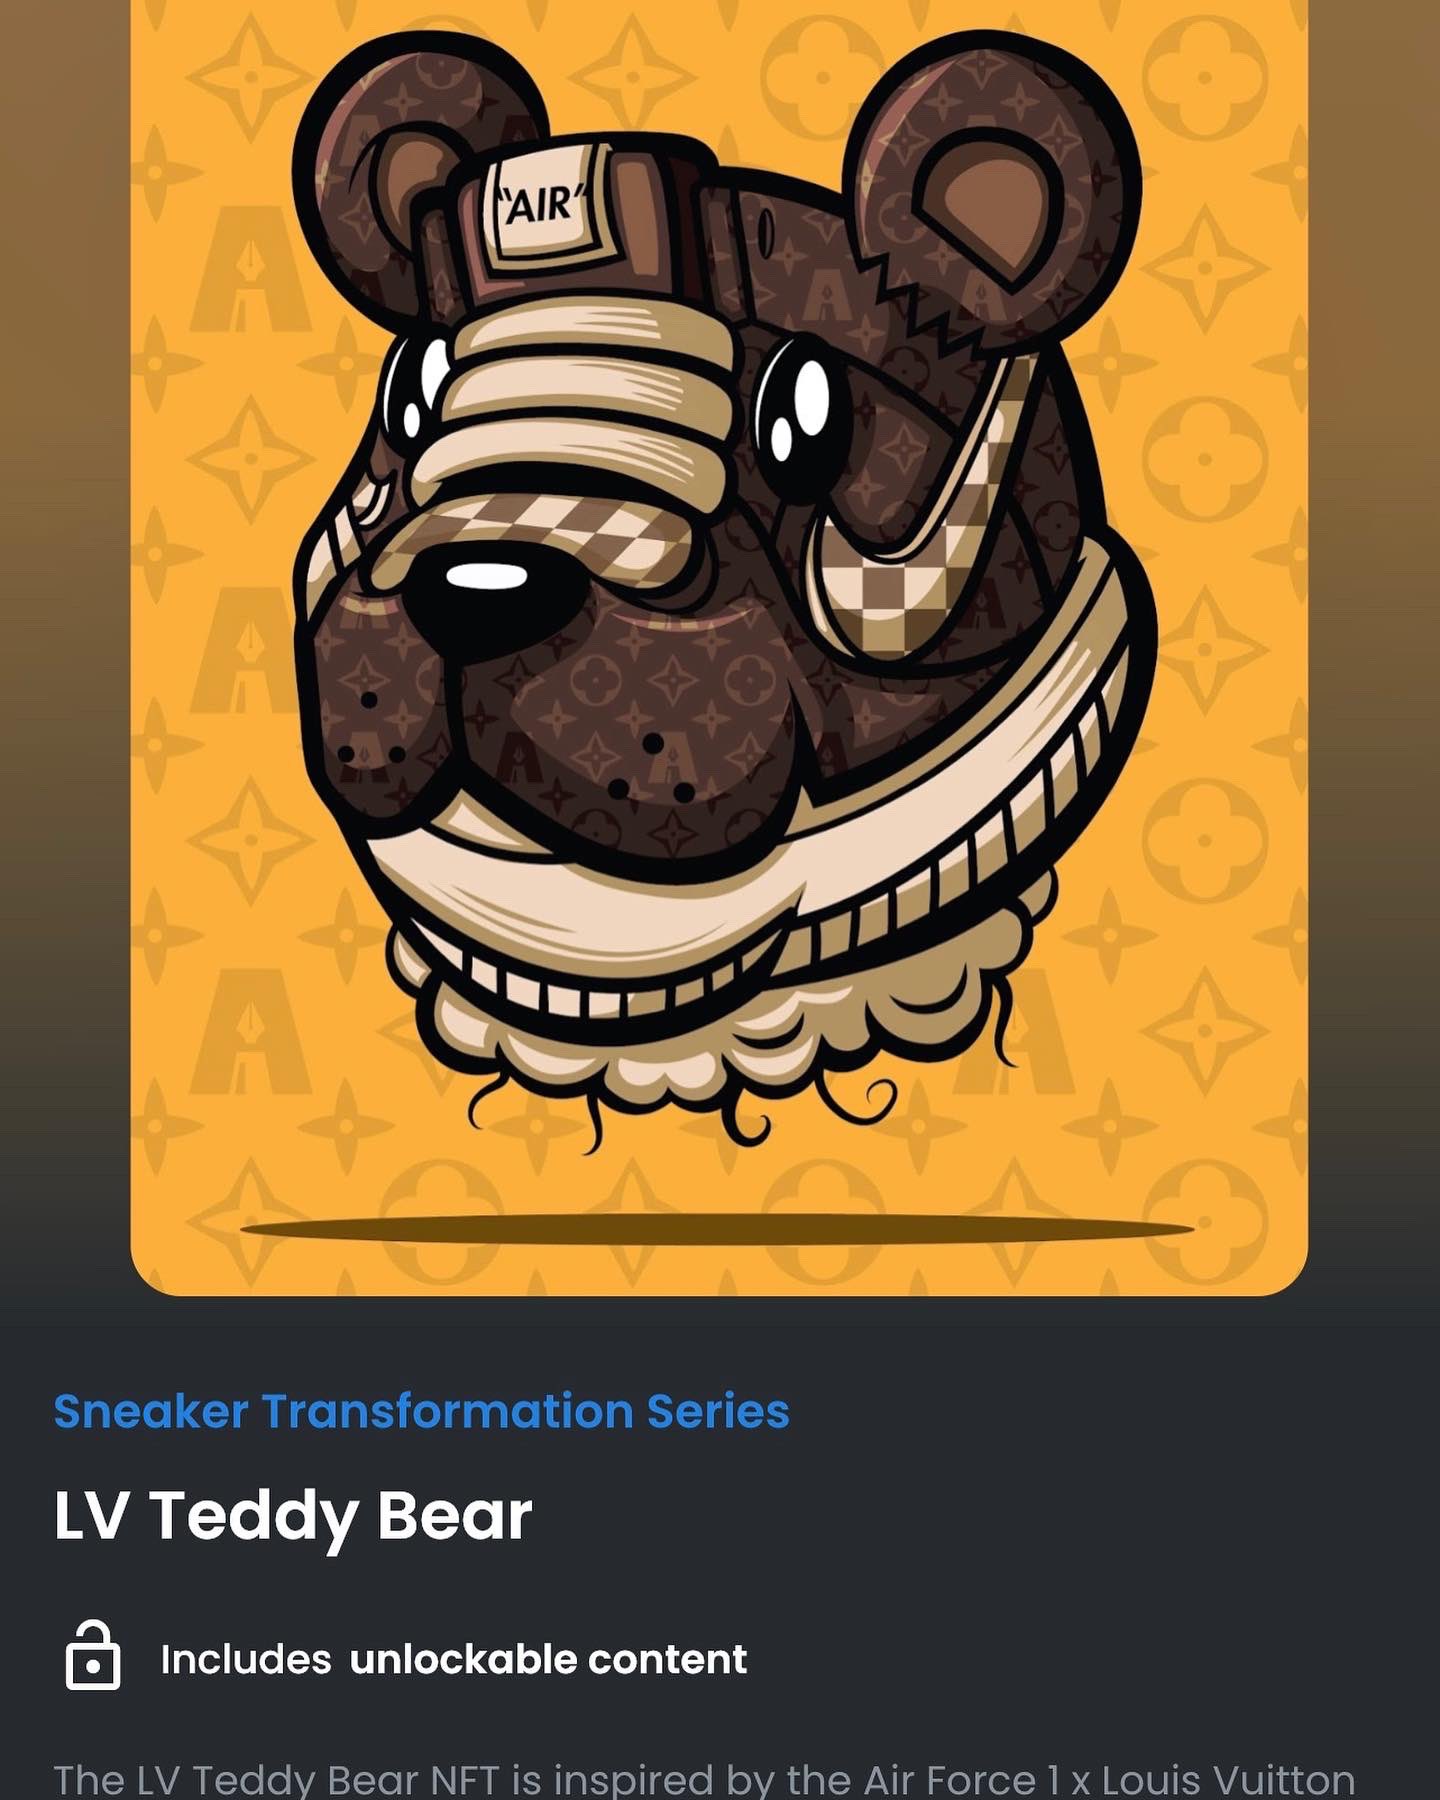 Anderson Bluu on X: I'm doing a 48 hour auction for my LV Teddy Bear NFT.  The auction is being held on my @Opensea page. #NFT #NFTs #NFTCommunity  #Nike   /